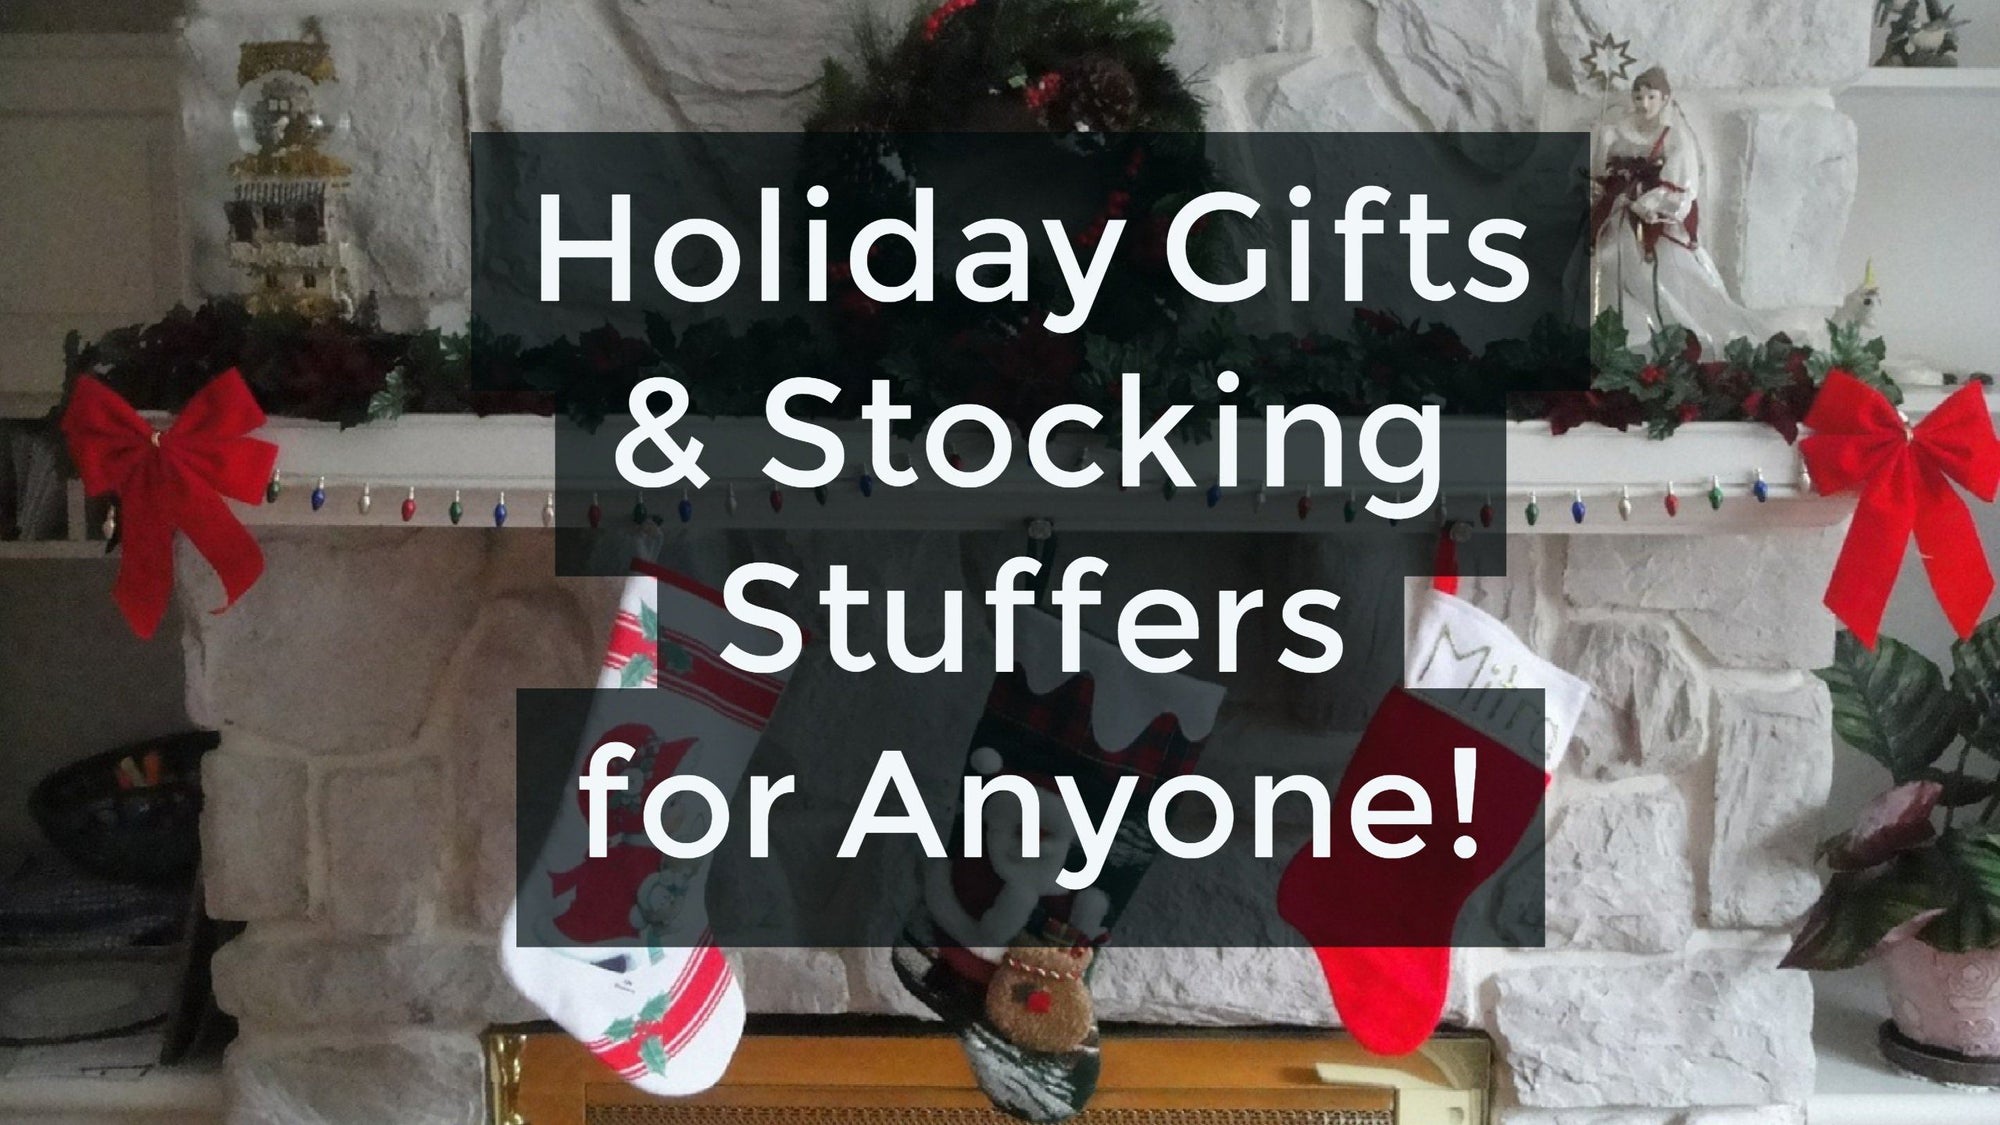 Holiday Gifts & Stocking Stuffers for Anyone